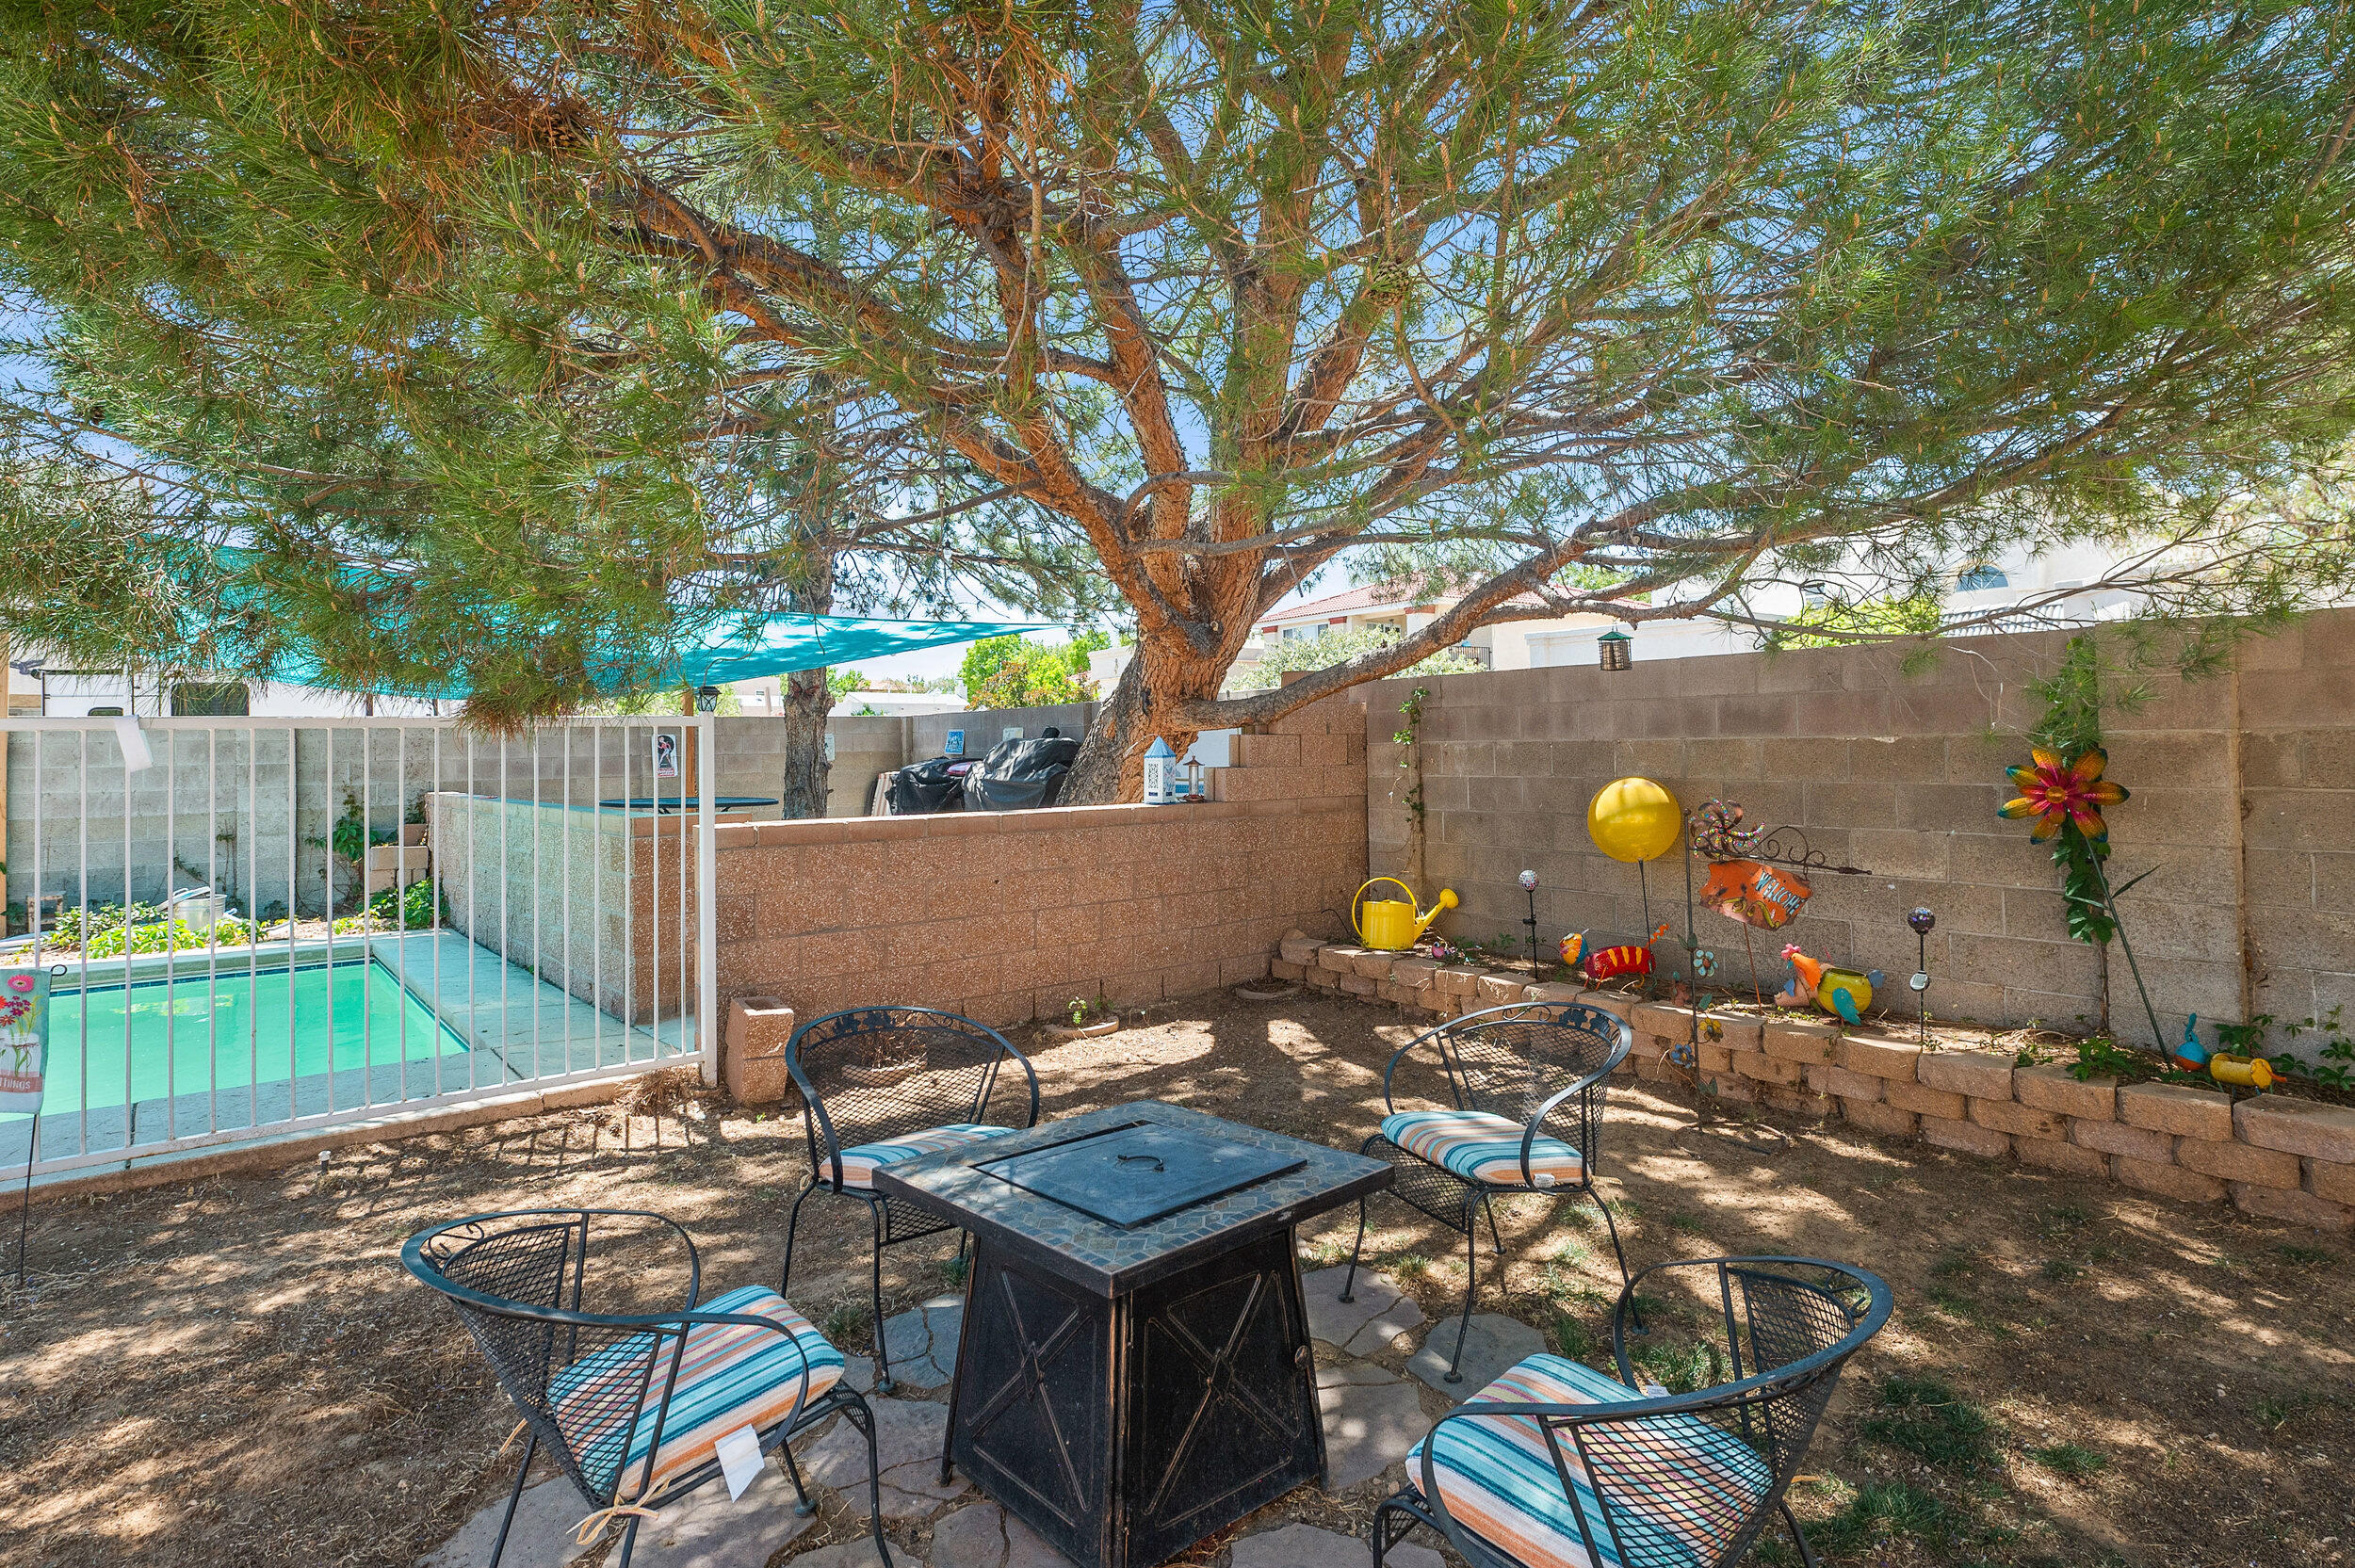 4540 Habershaw Road NW, Albuquerque, New Mexico 87120, 3 Bedrooms Bedrooms, ,3 BathroomsBathrooms,Residential,For Sale,4540 Habershaw Road NW,1061979